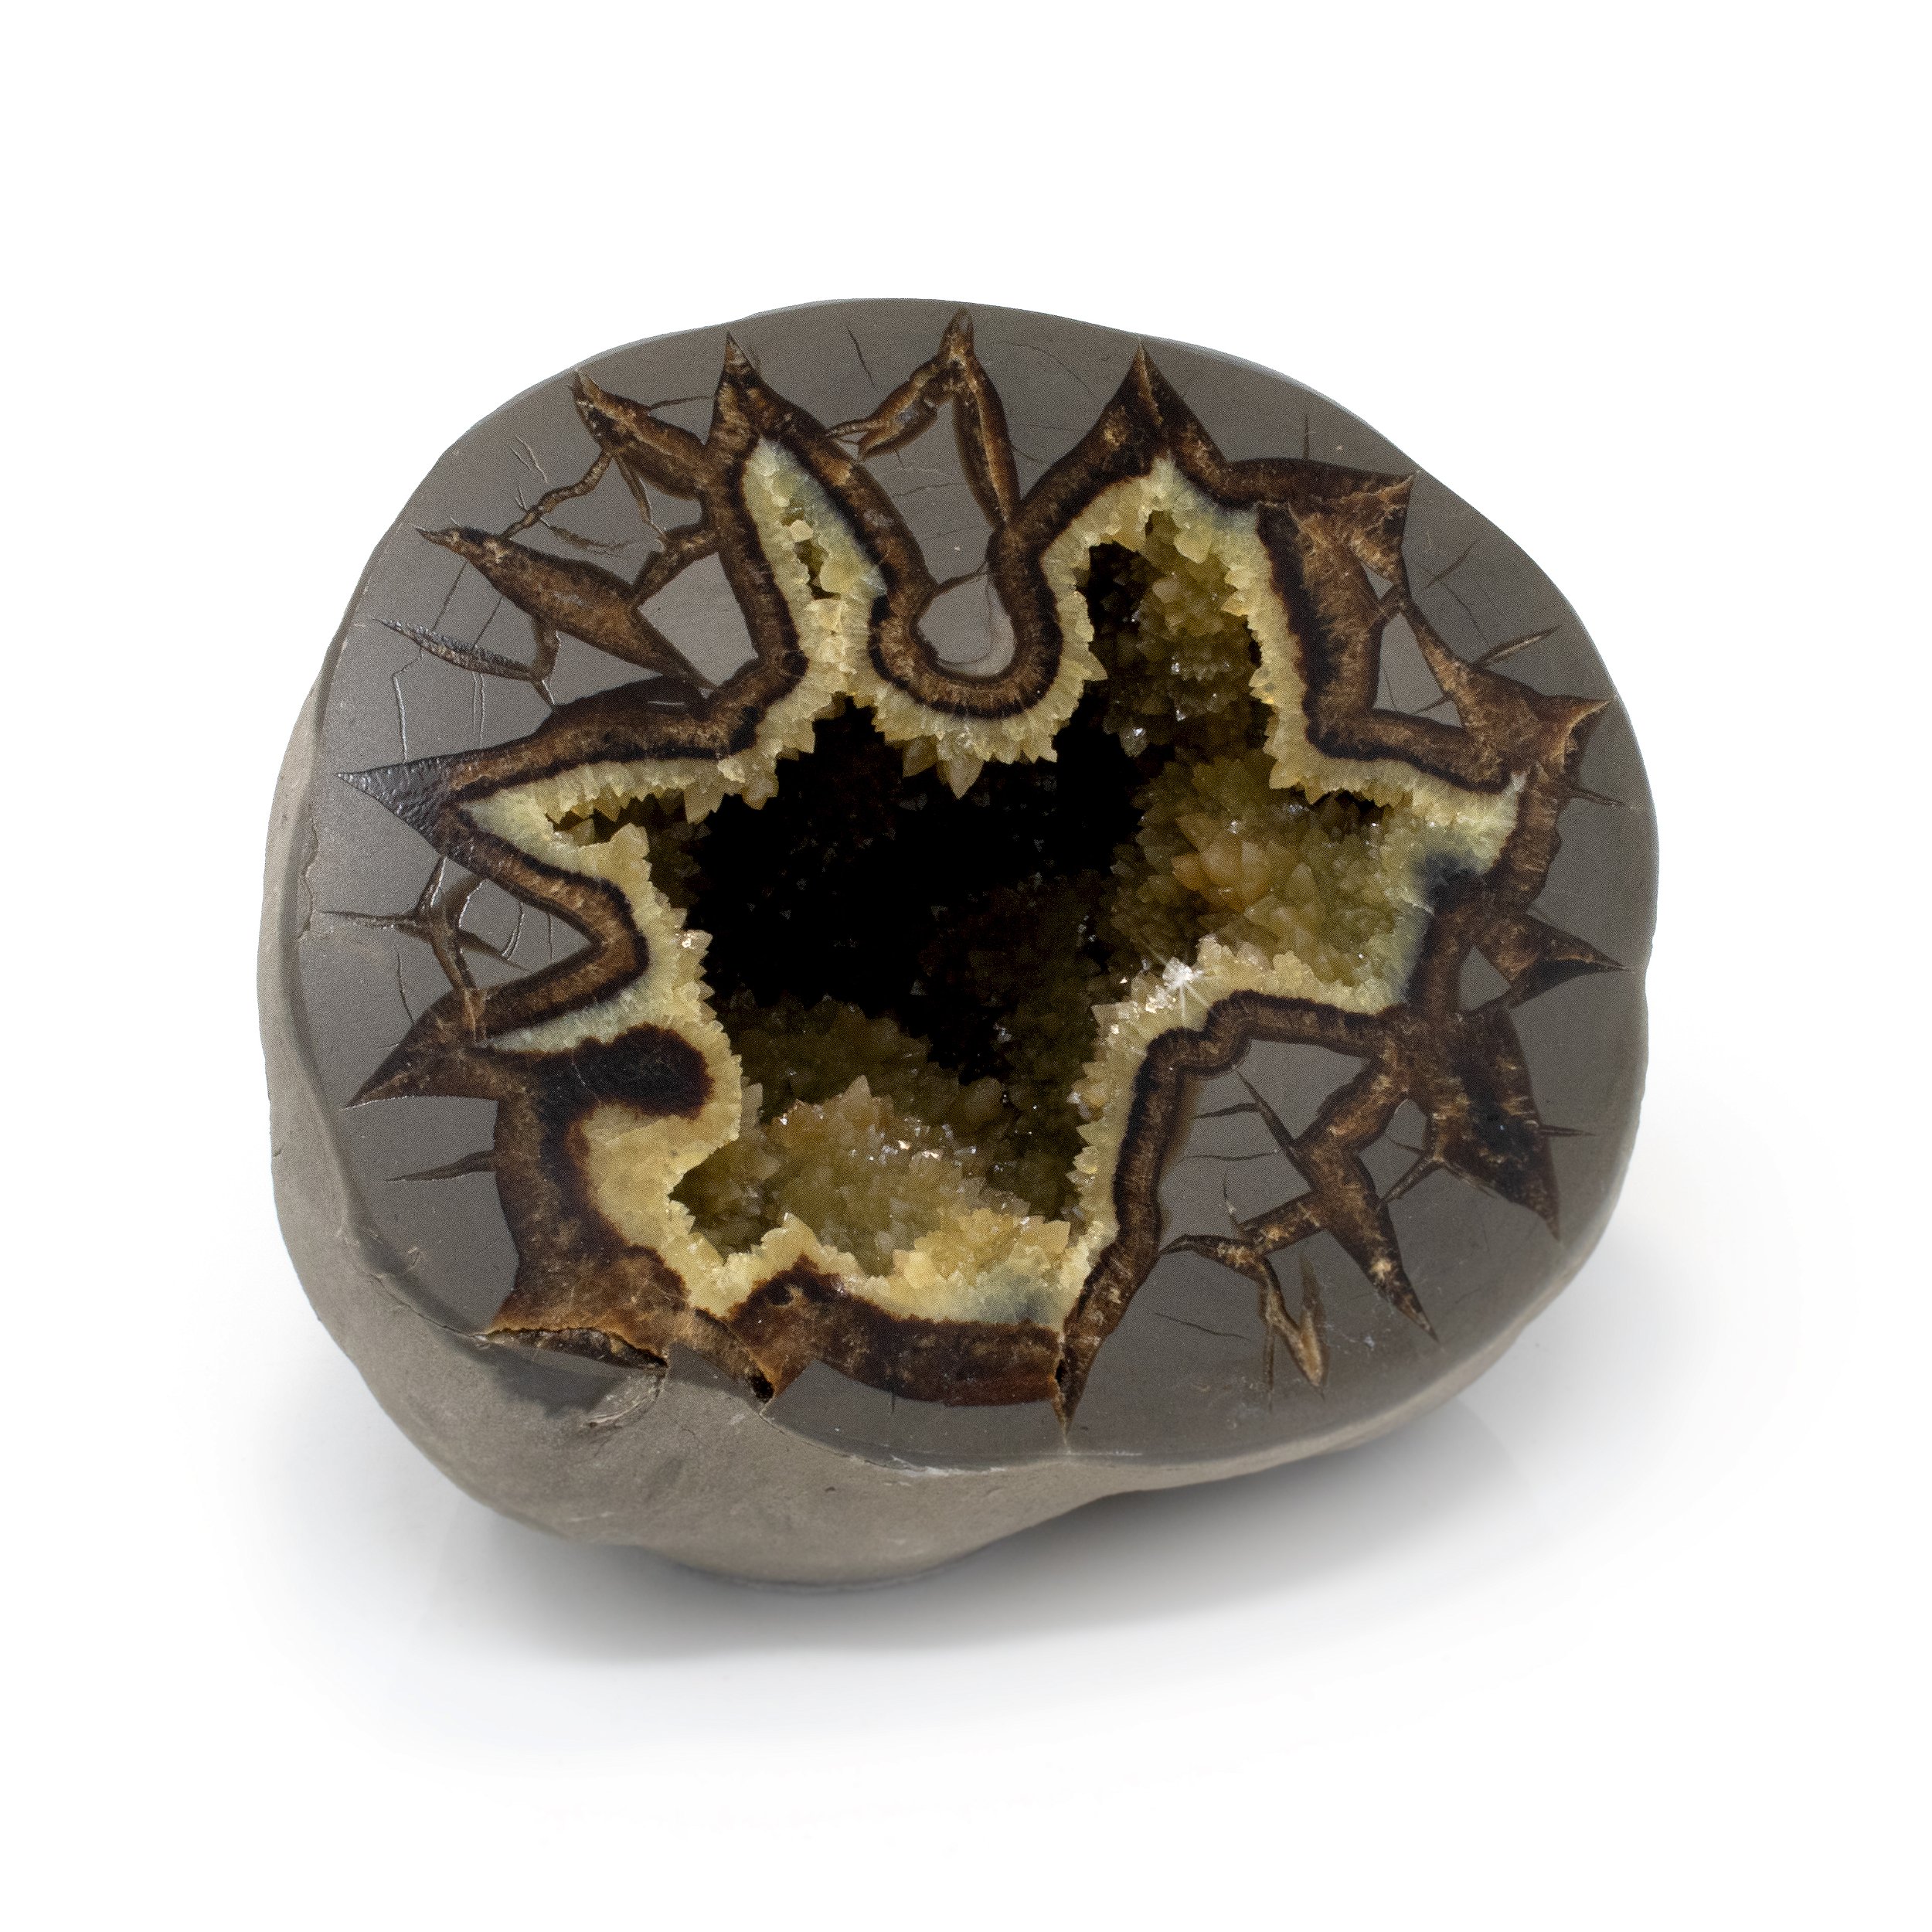 Septarian Geode With Druze Pocket & Cut Base From Utah - Bubbled Crystal Cluster Opaque Druze With Mustard Yellow Coloring & Flat Face